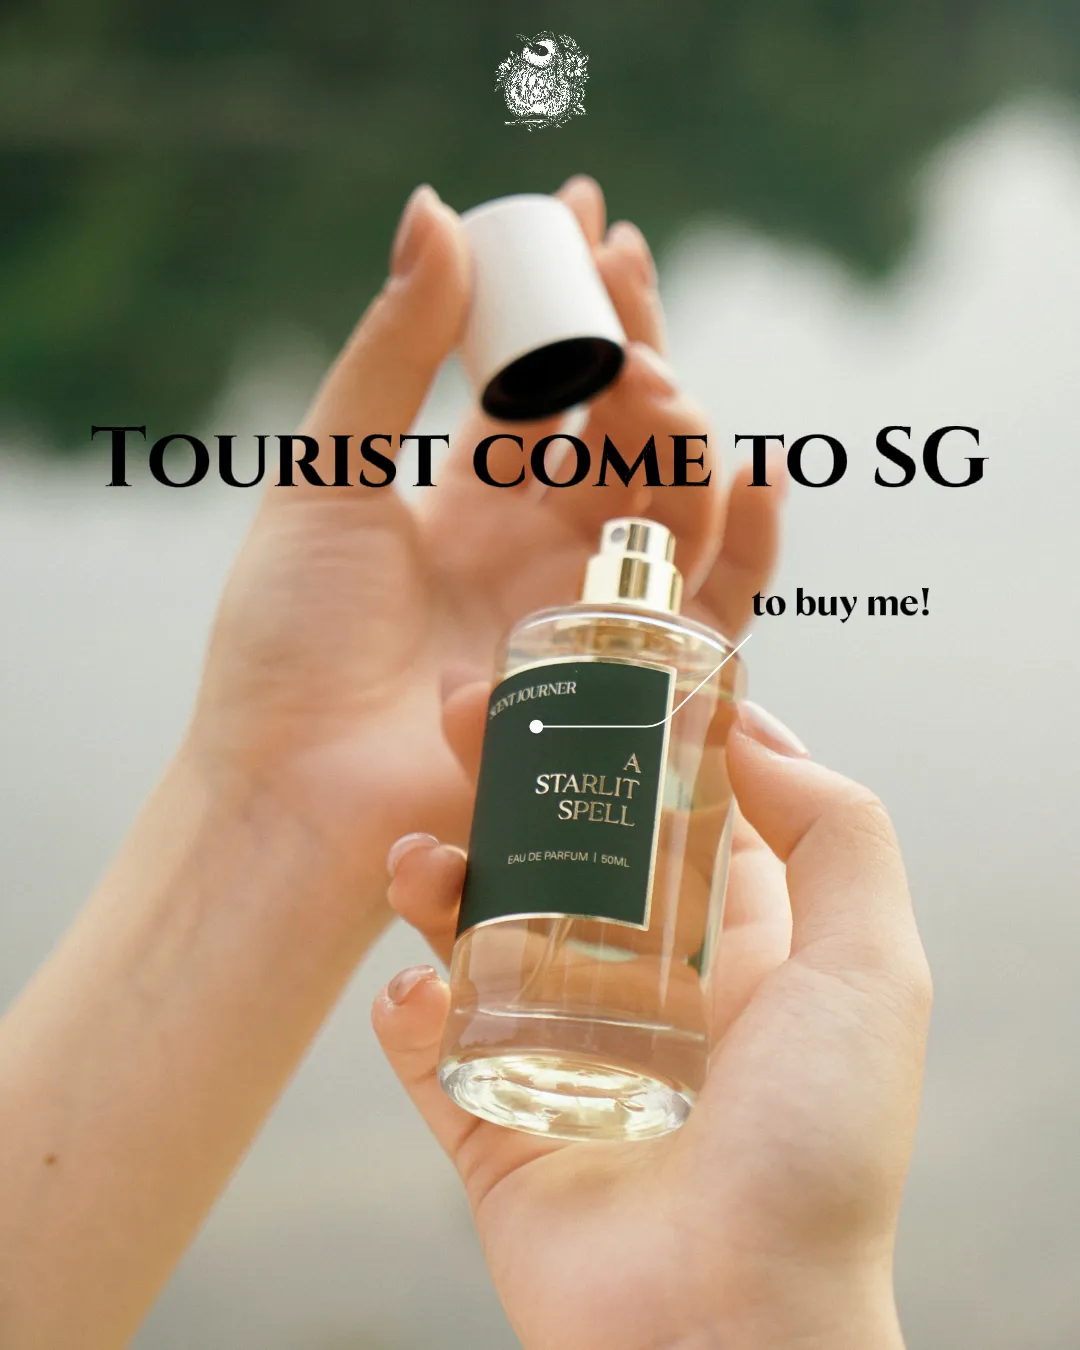 Perfume made international tourists travel to SG!'s images